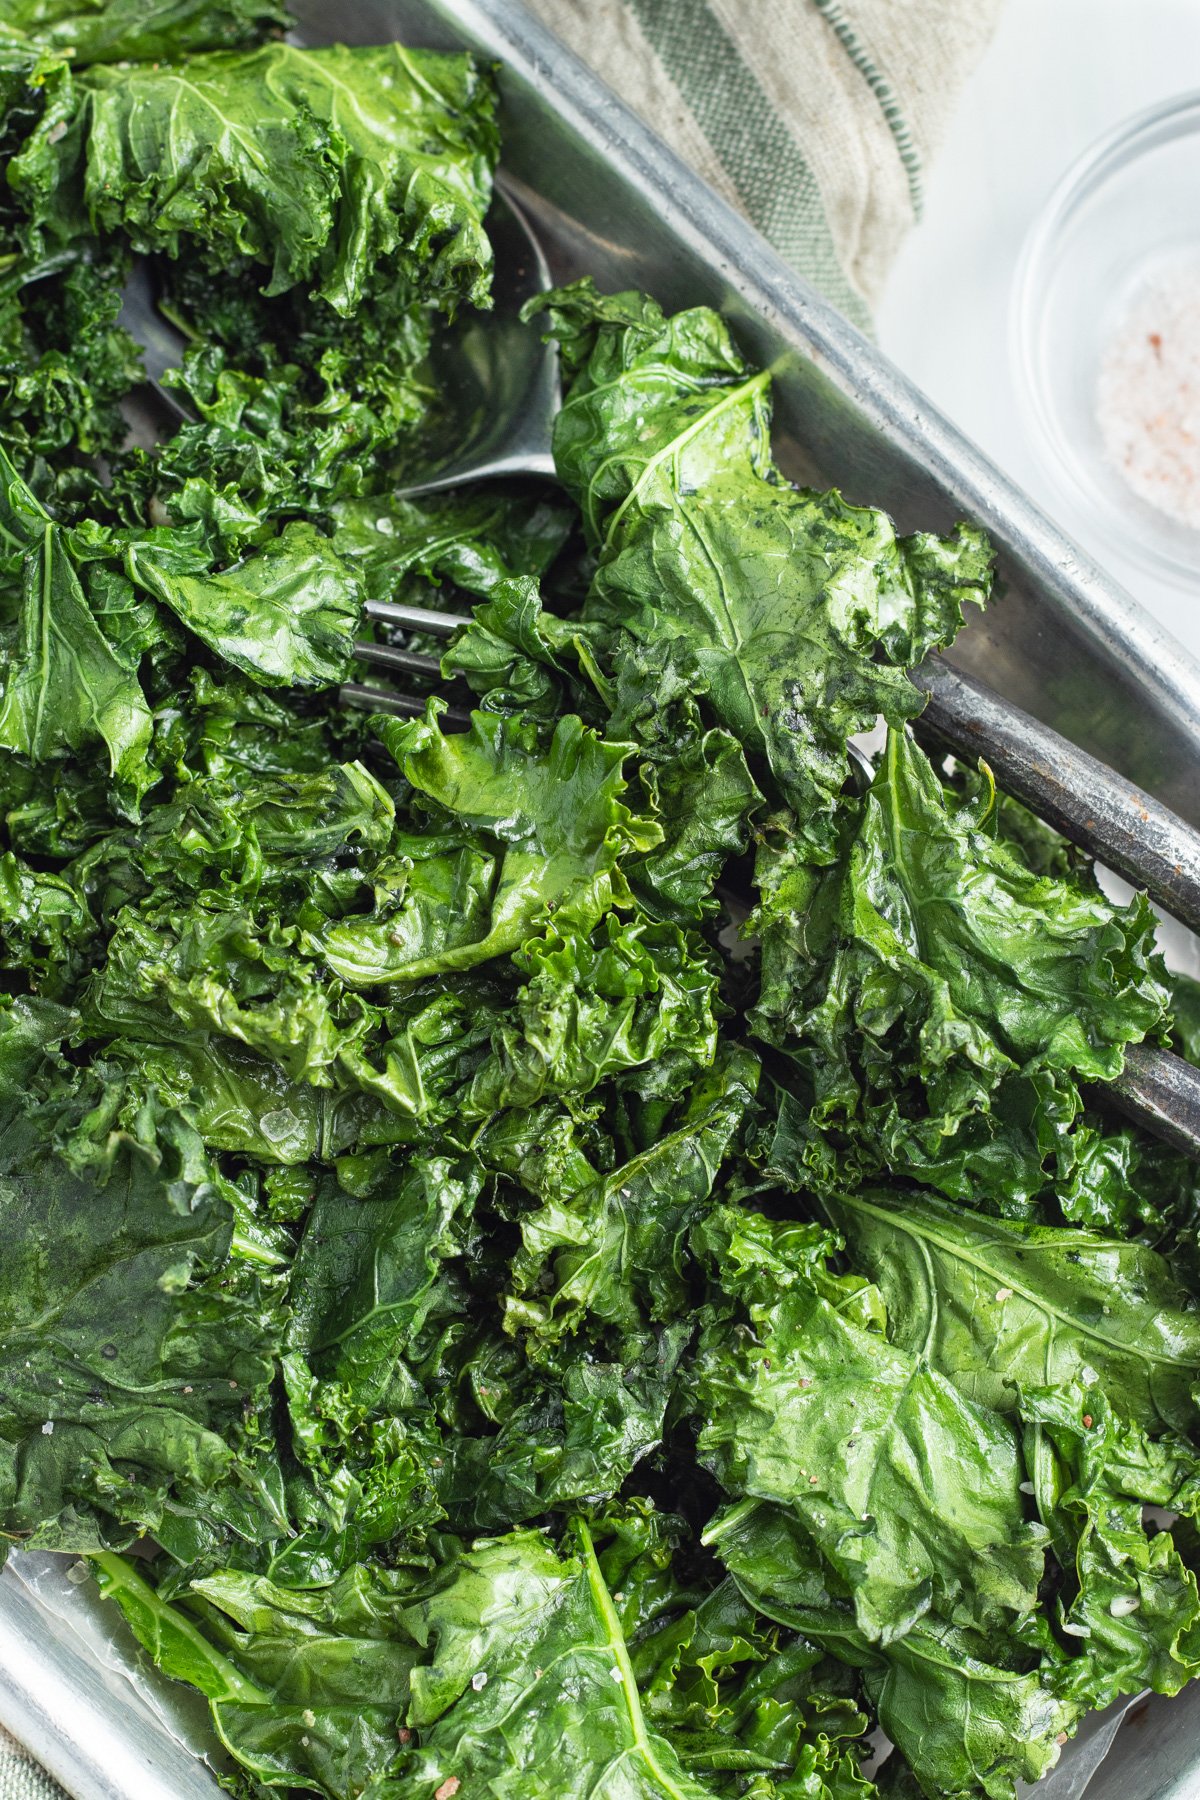 A sheet pan, angled across the field of view, holding bright green leaves of roasted kale with a pair of silver tongs.